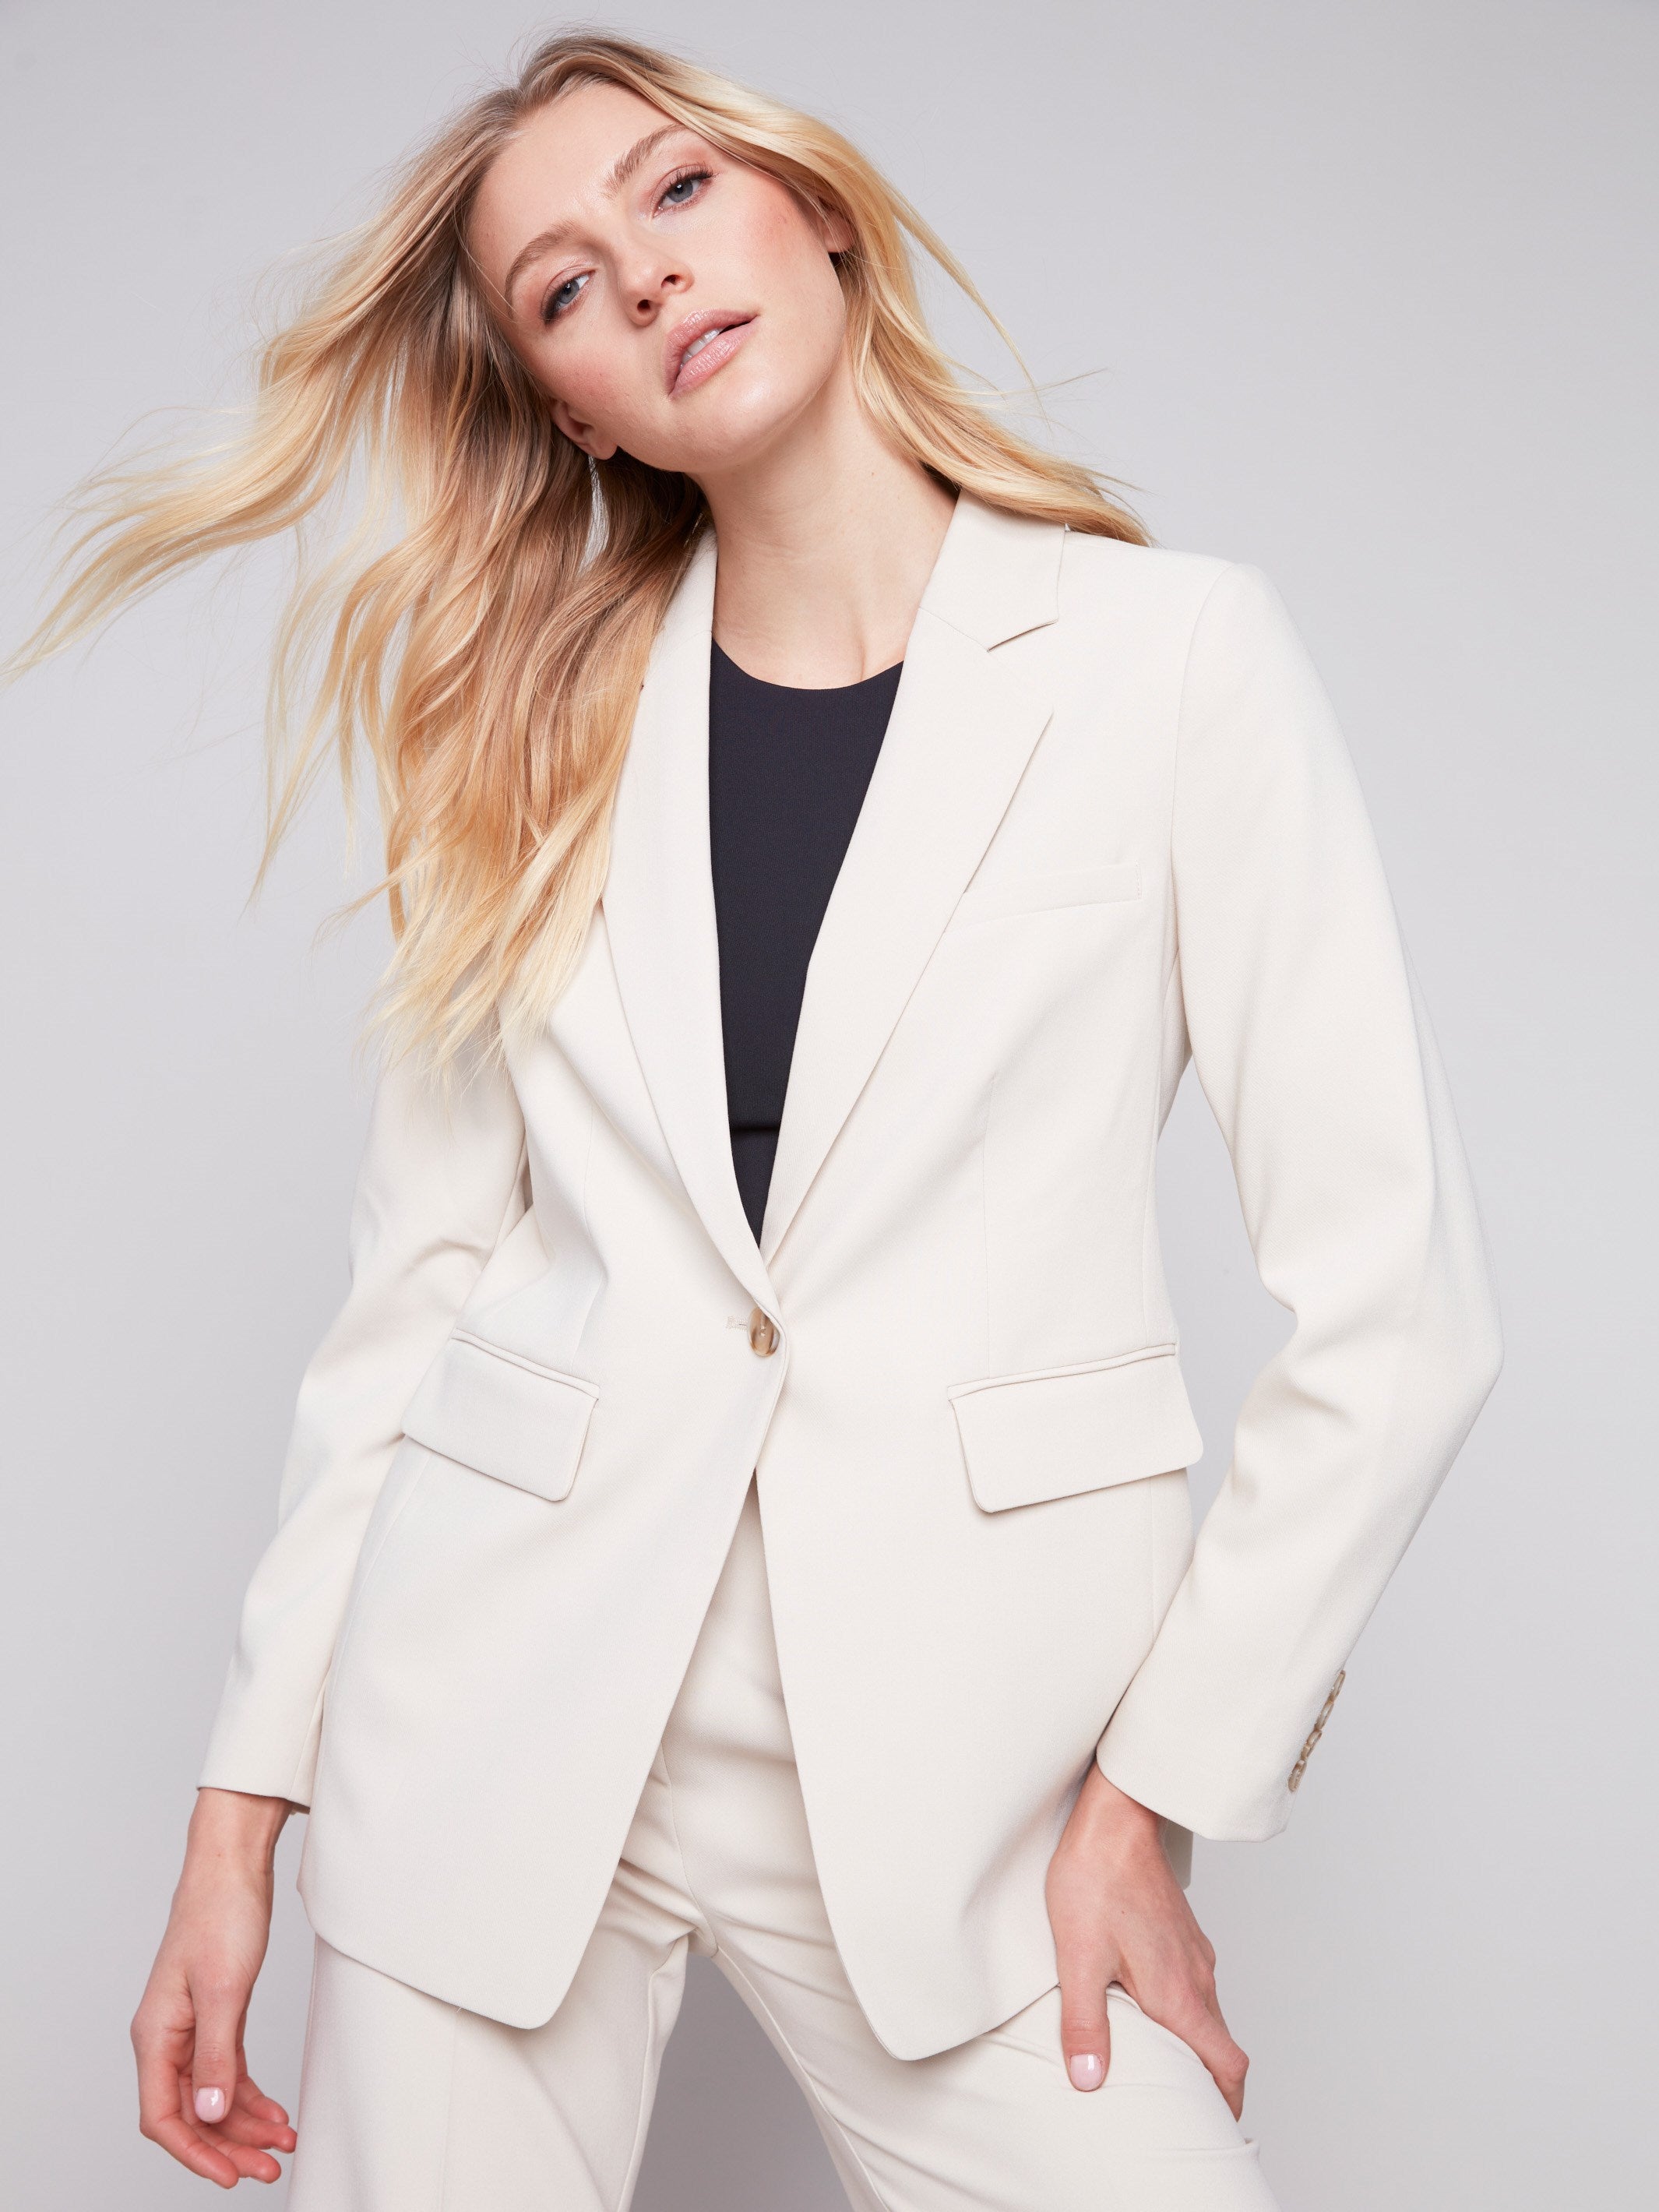 Blazer with Ruched Back - Beige - Charlie B Collection Canada - Image 3